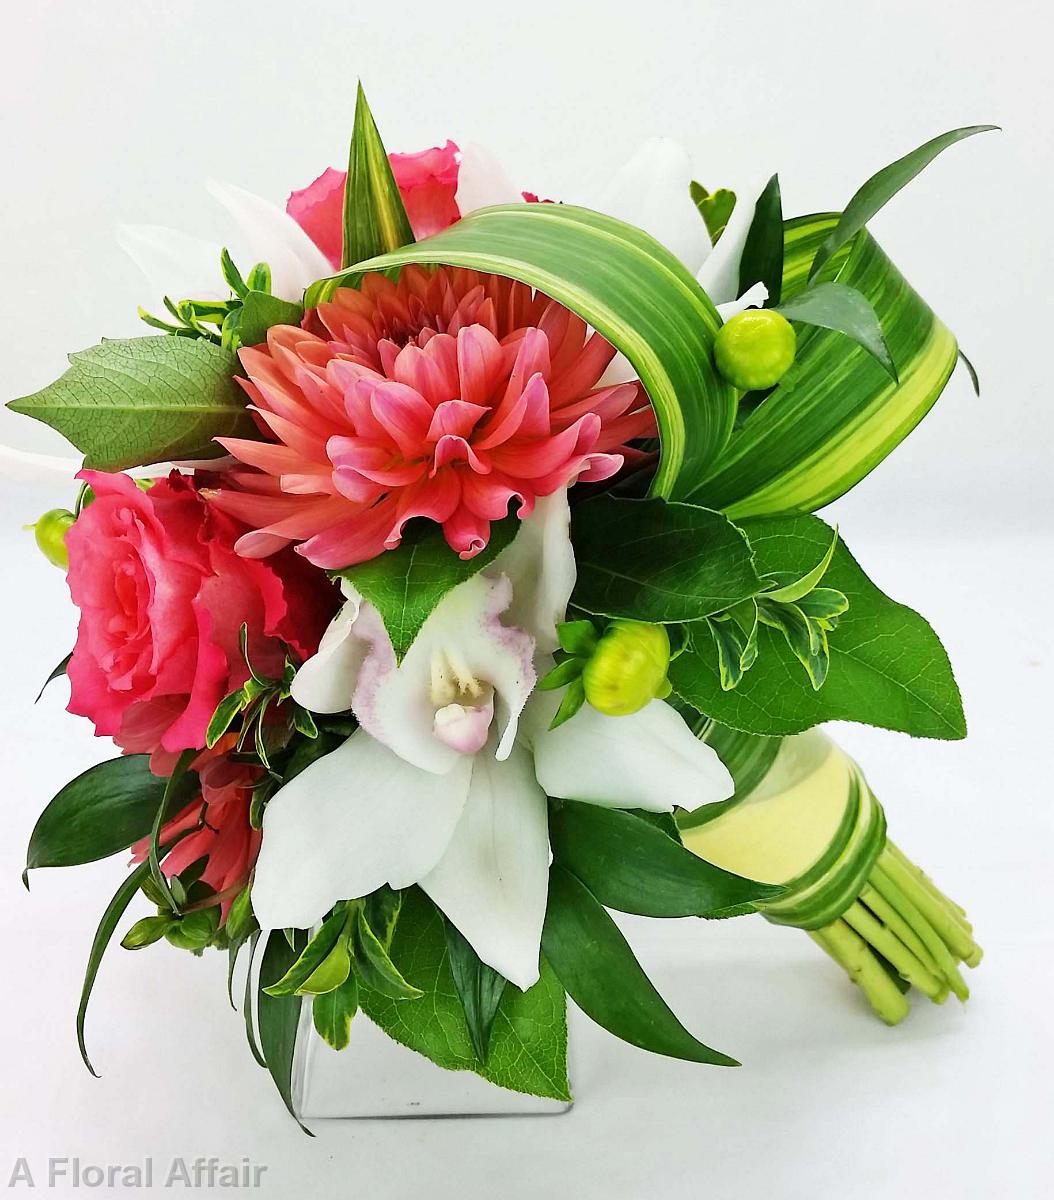 BB1224-Tropical Guava and Coral Bridesmaids Boquet with Aspidistra Leaf Wrap